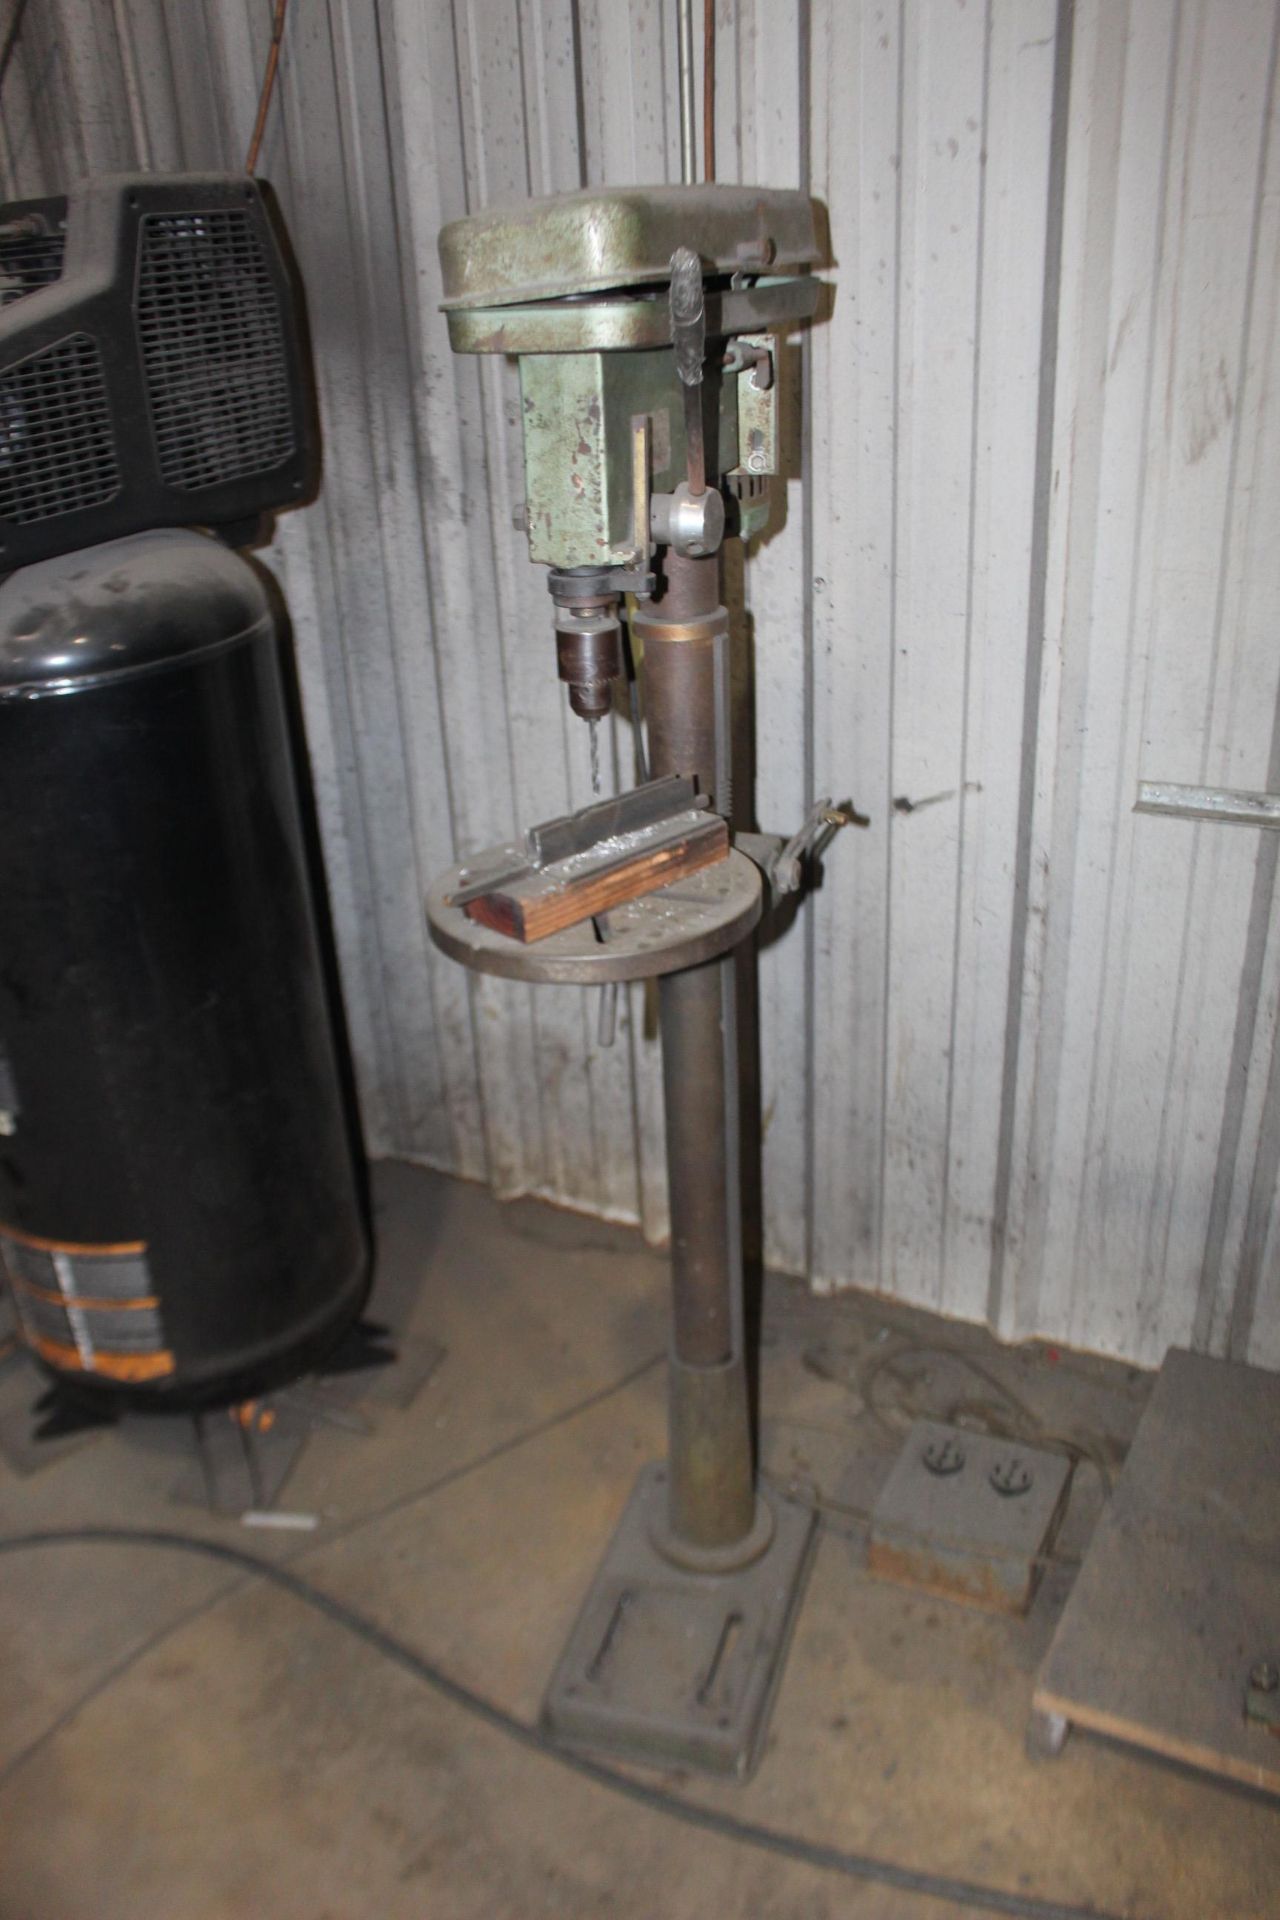 DRILL PRESS (Location #1: Tyco Air Products, Inc., 17309 Hufsmith Kohrville Road, Tomball, TX